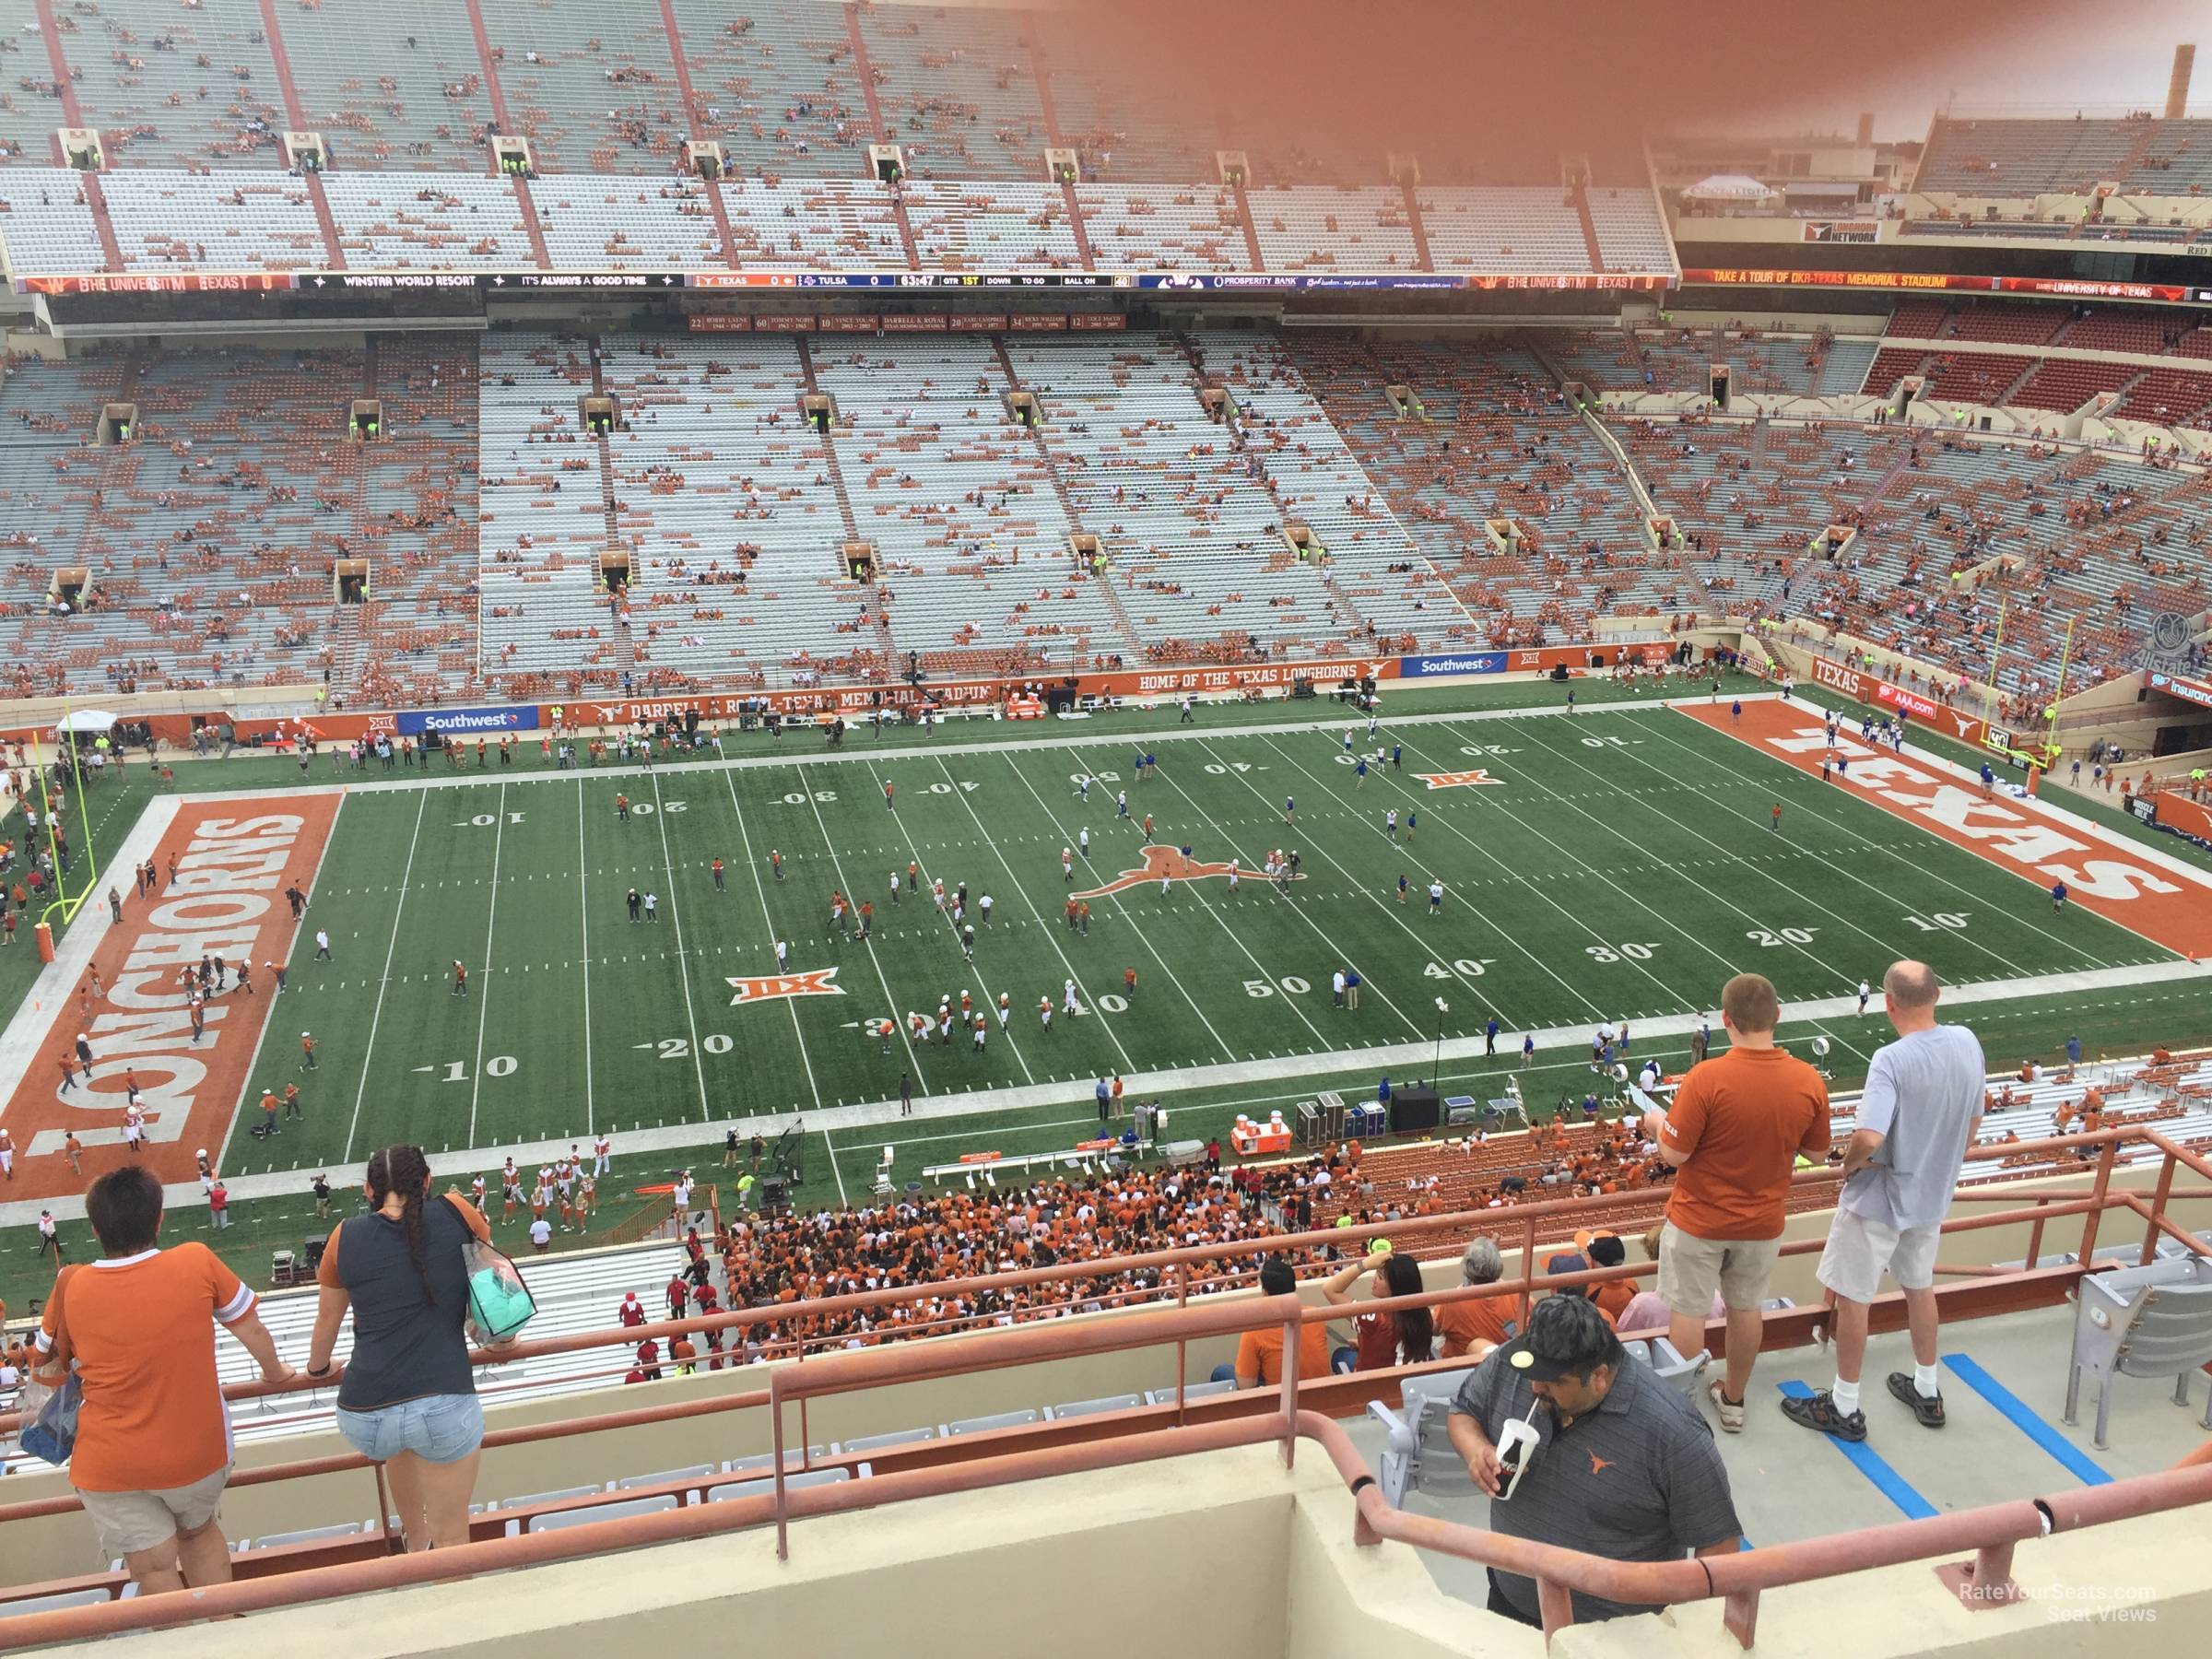 section 130, row 10 seat view  - dkr-texas memorial stadium